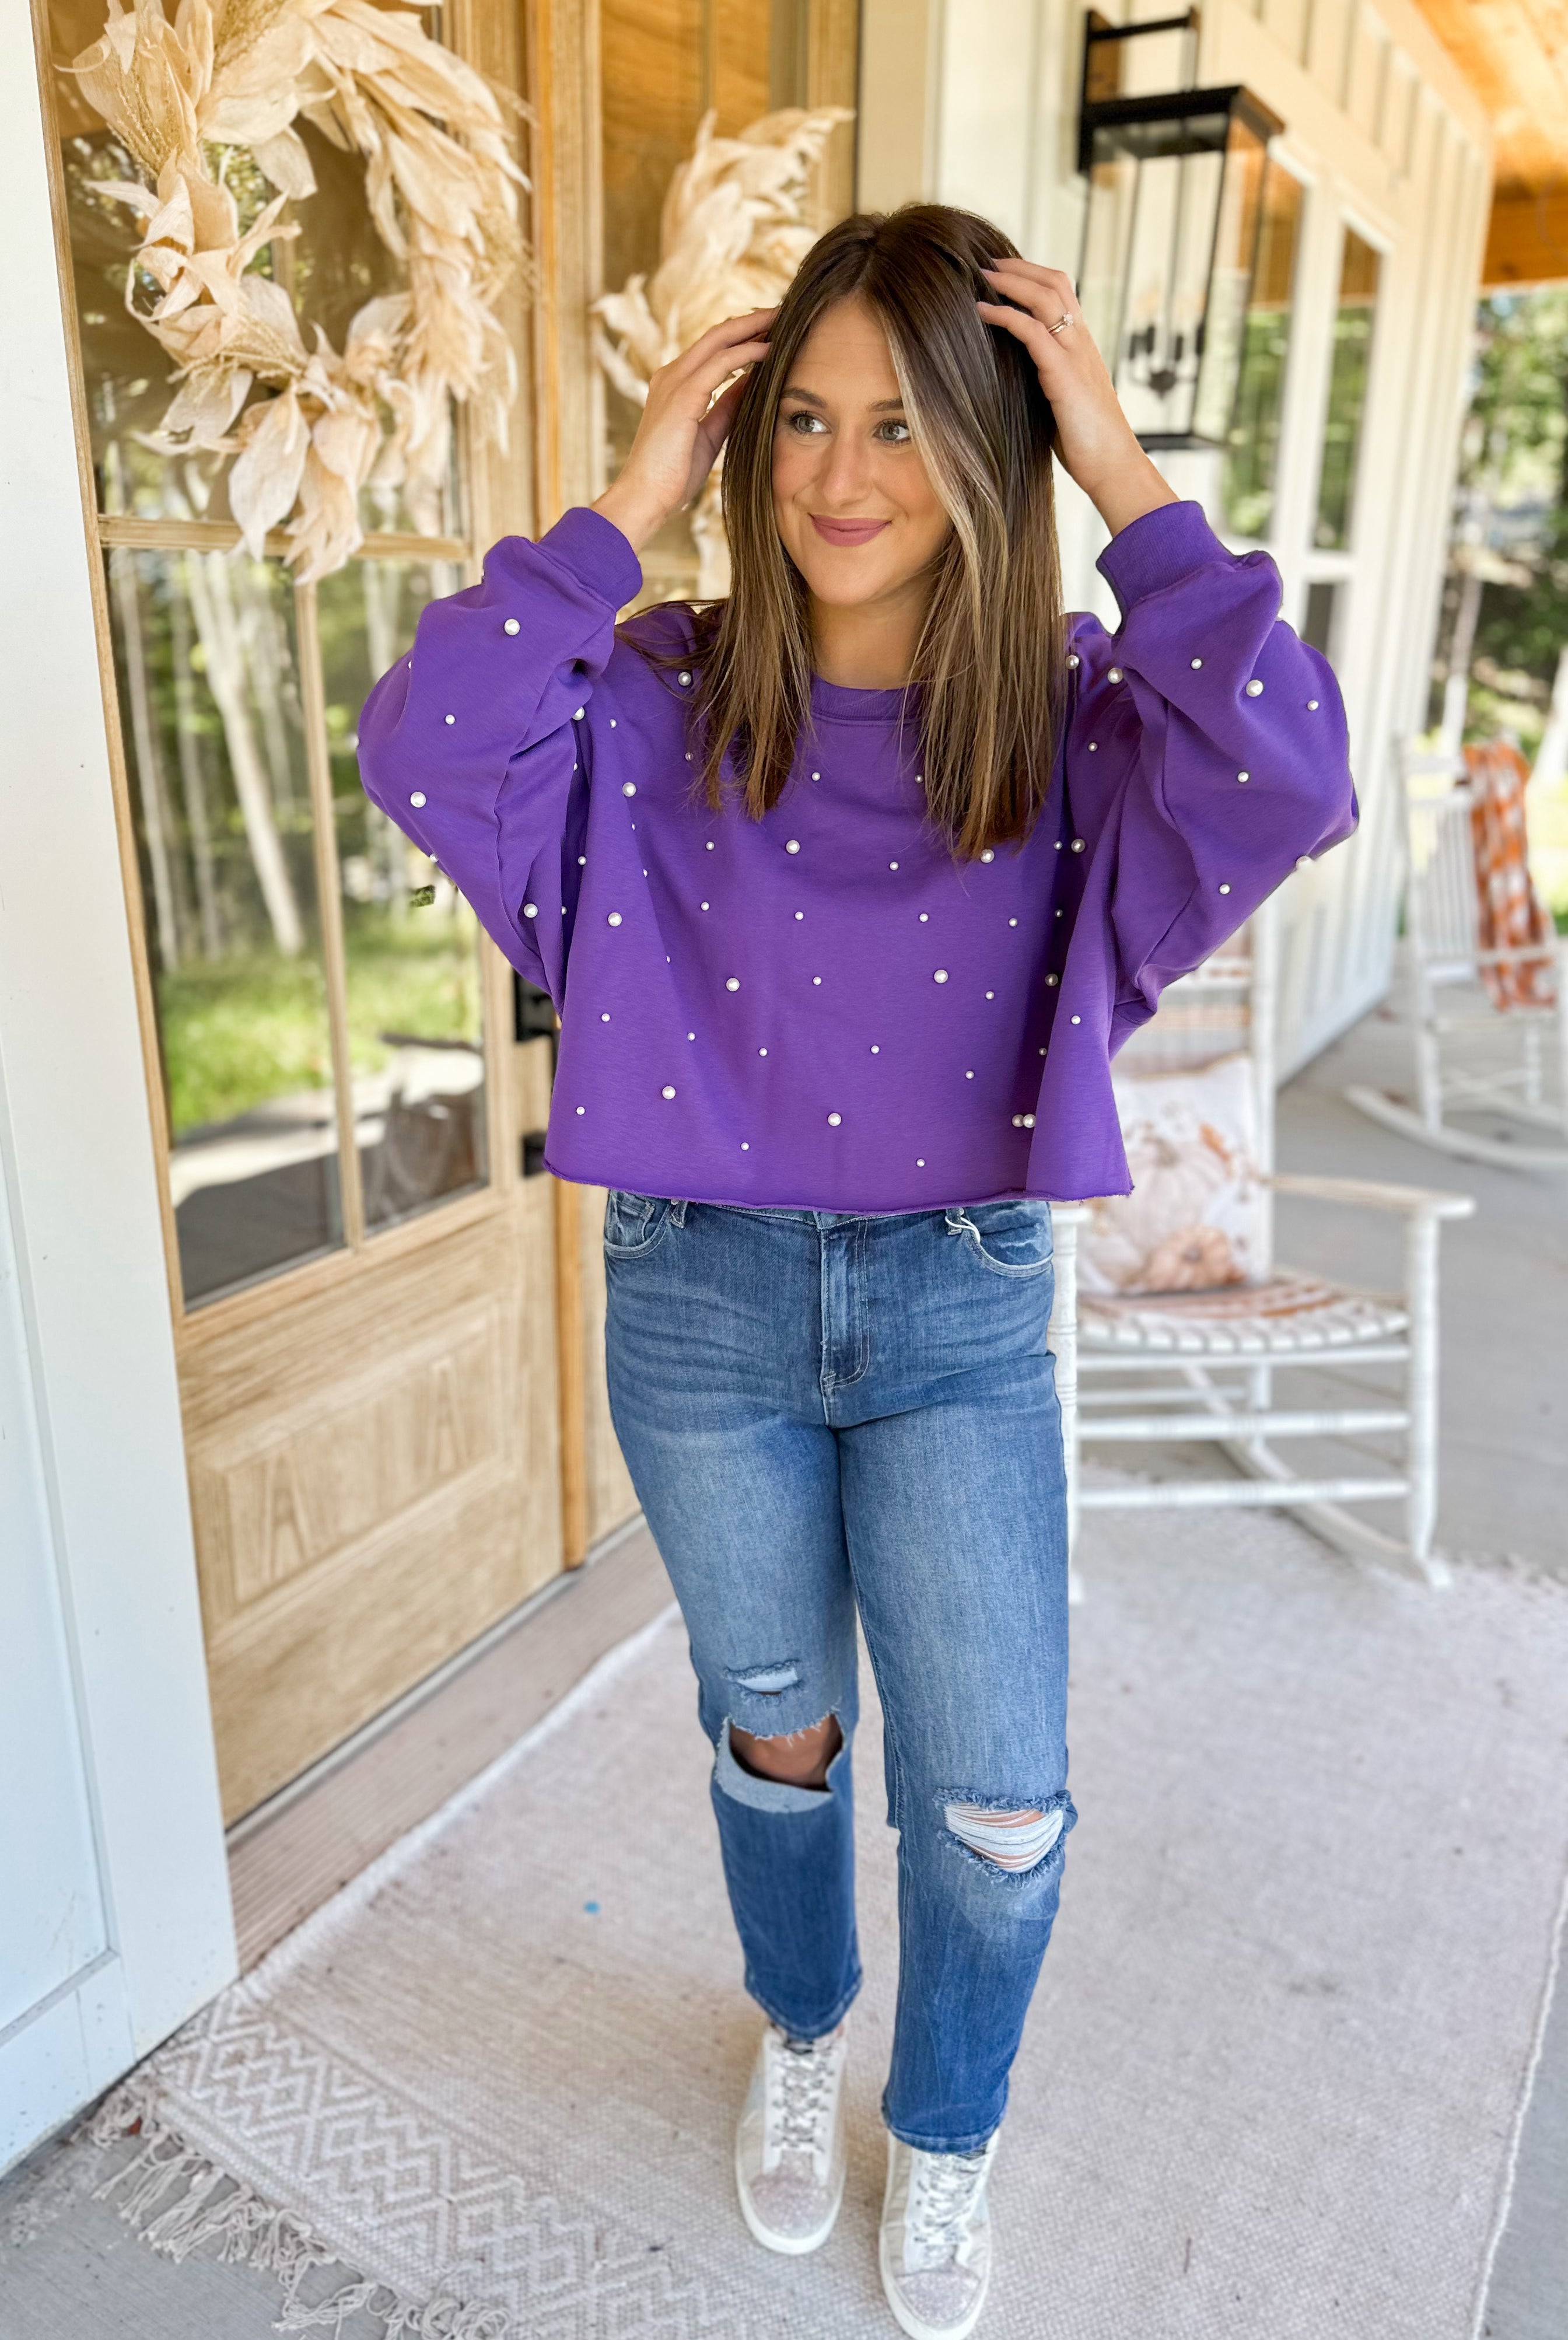 Cozy Pearl Allover Cropped Studded Sweatshirt - Be You Boutique